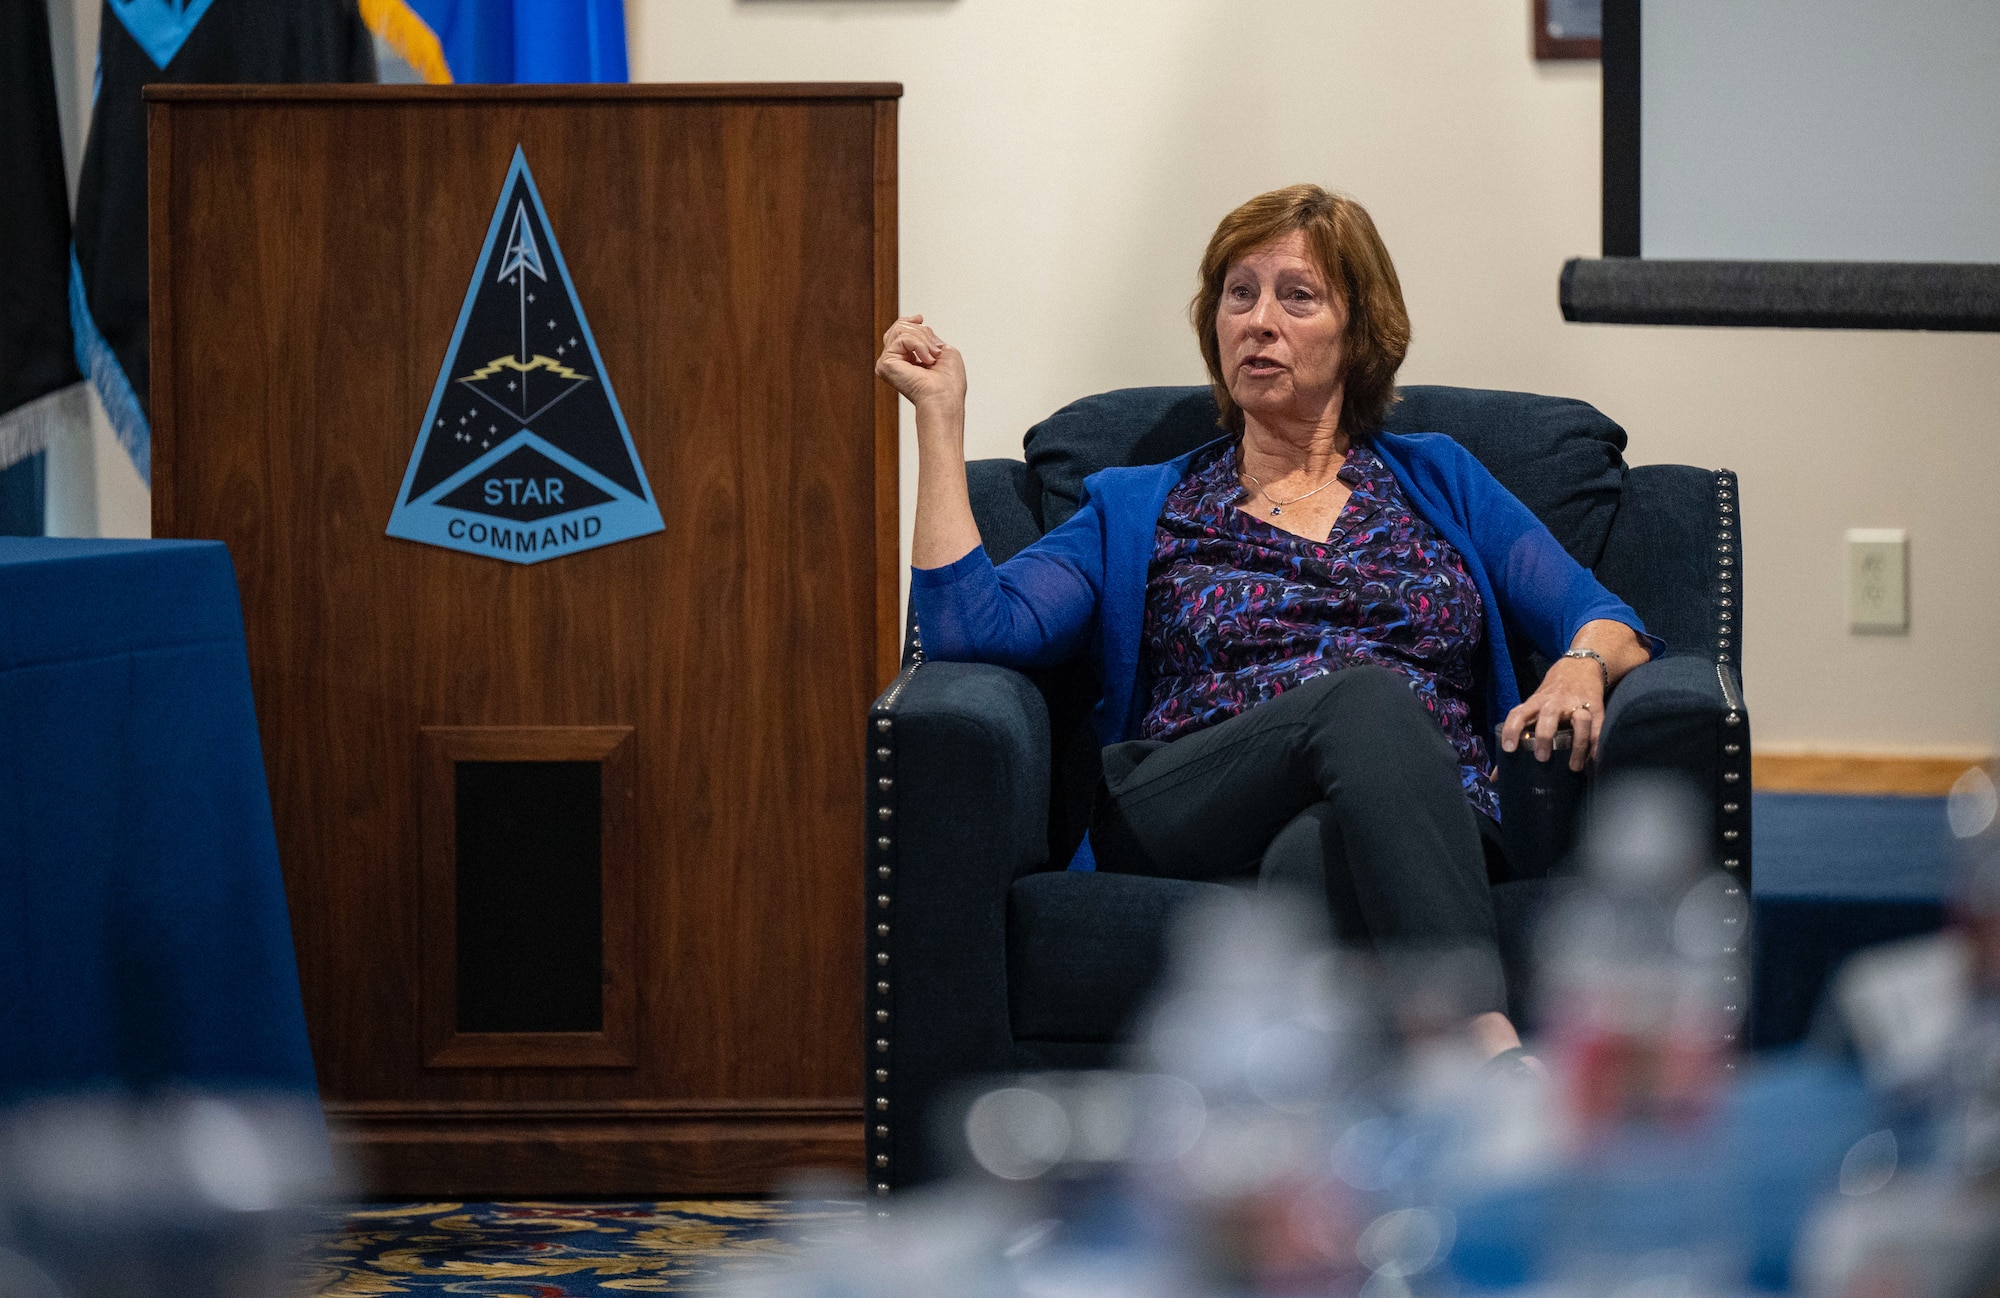 Laura Hyten, wife of retired Gen. John Hyten, takes part in a discussion with Space Training and Readiness Command senior leaders and spouses during a conference